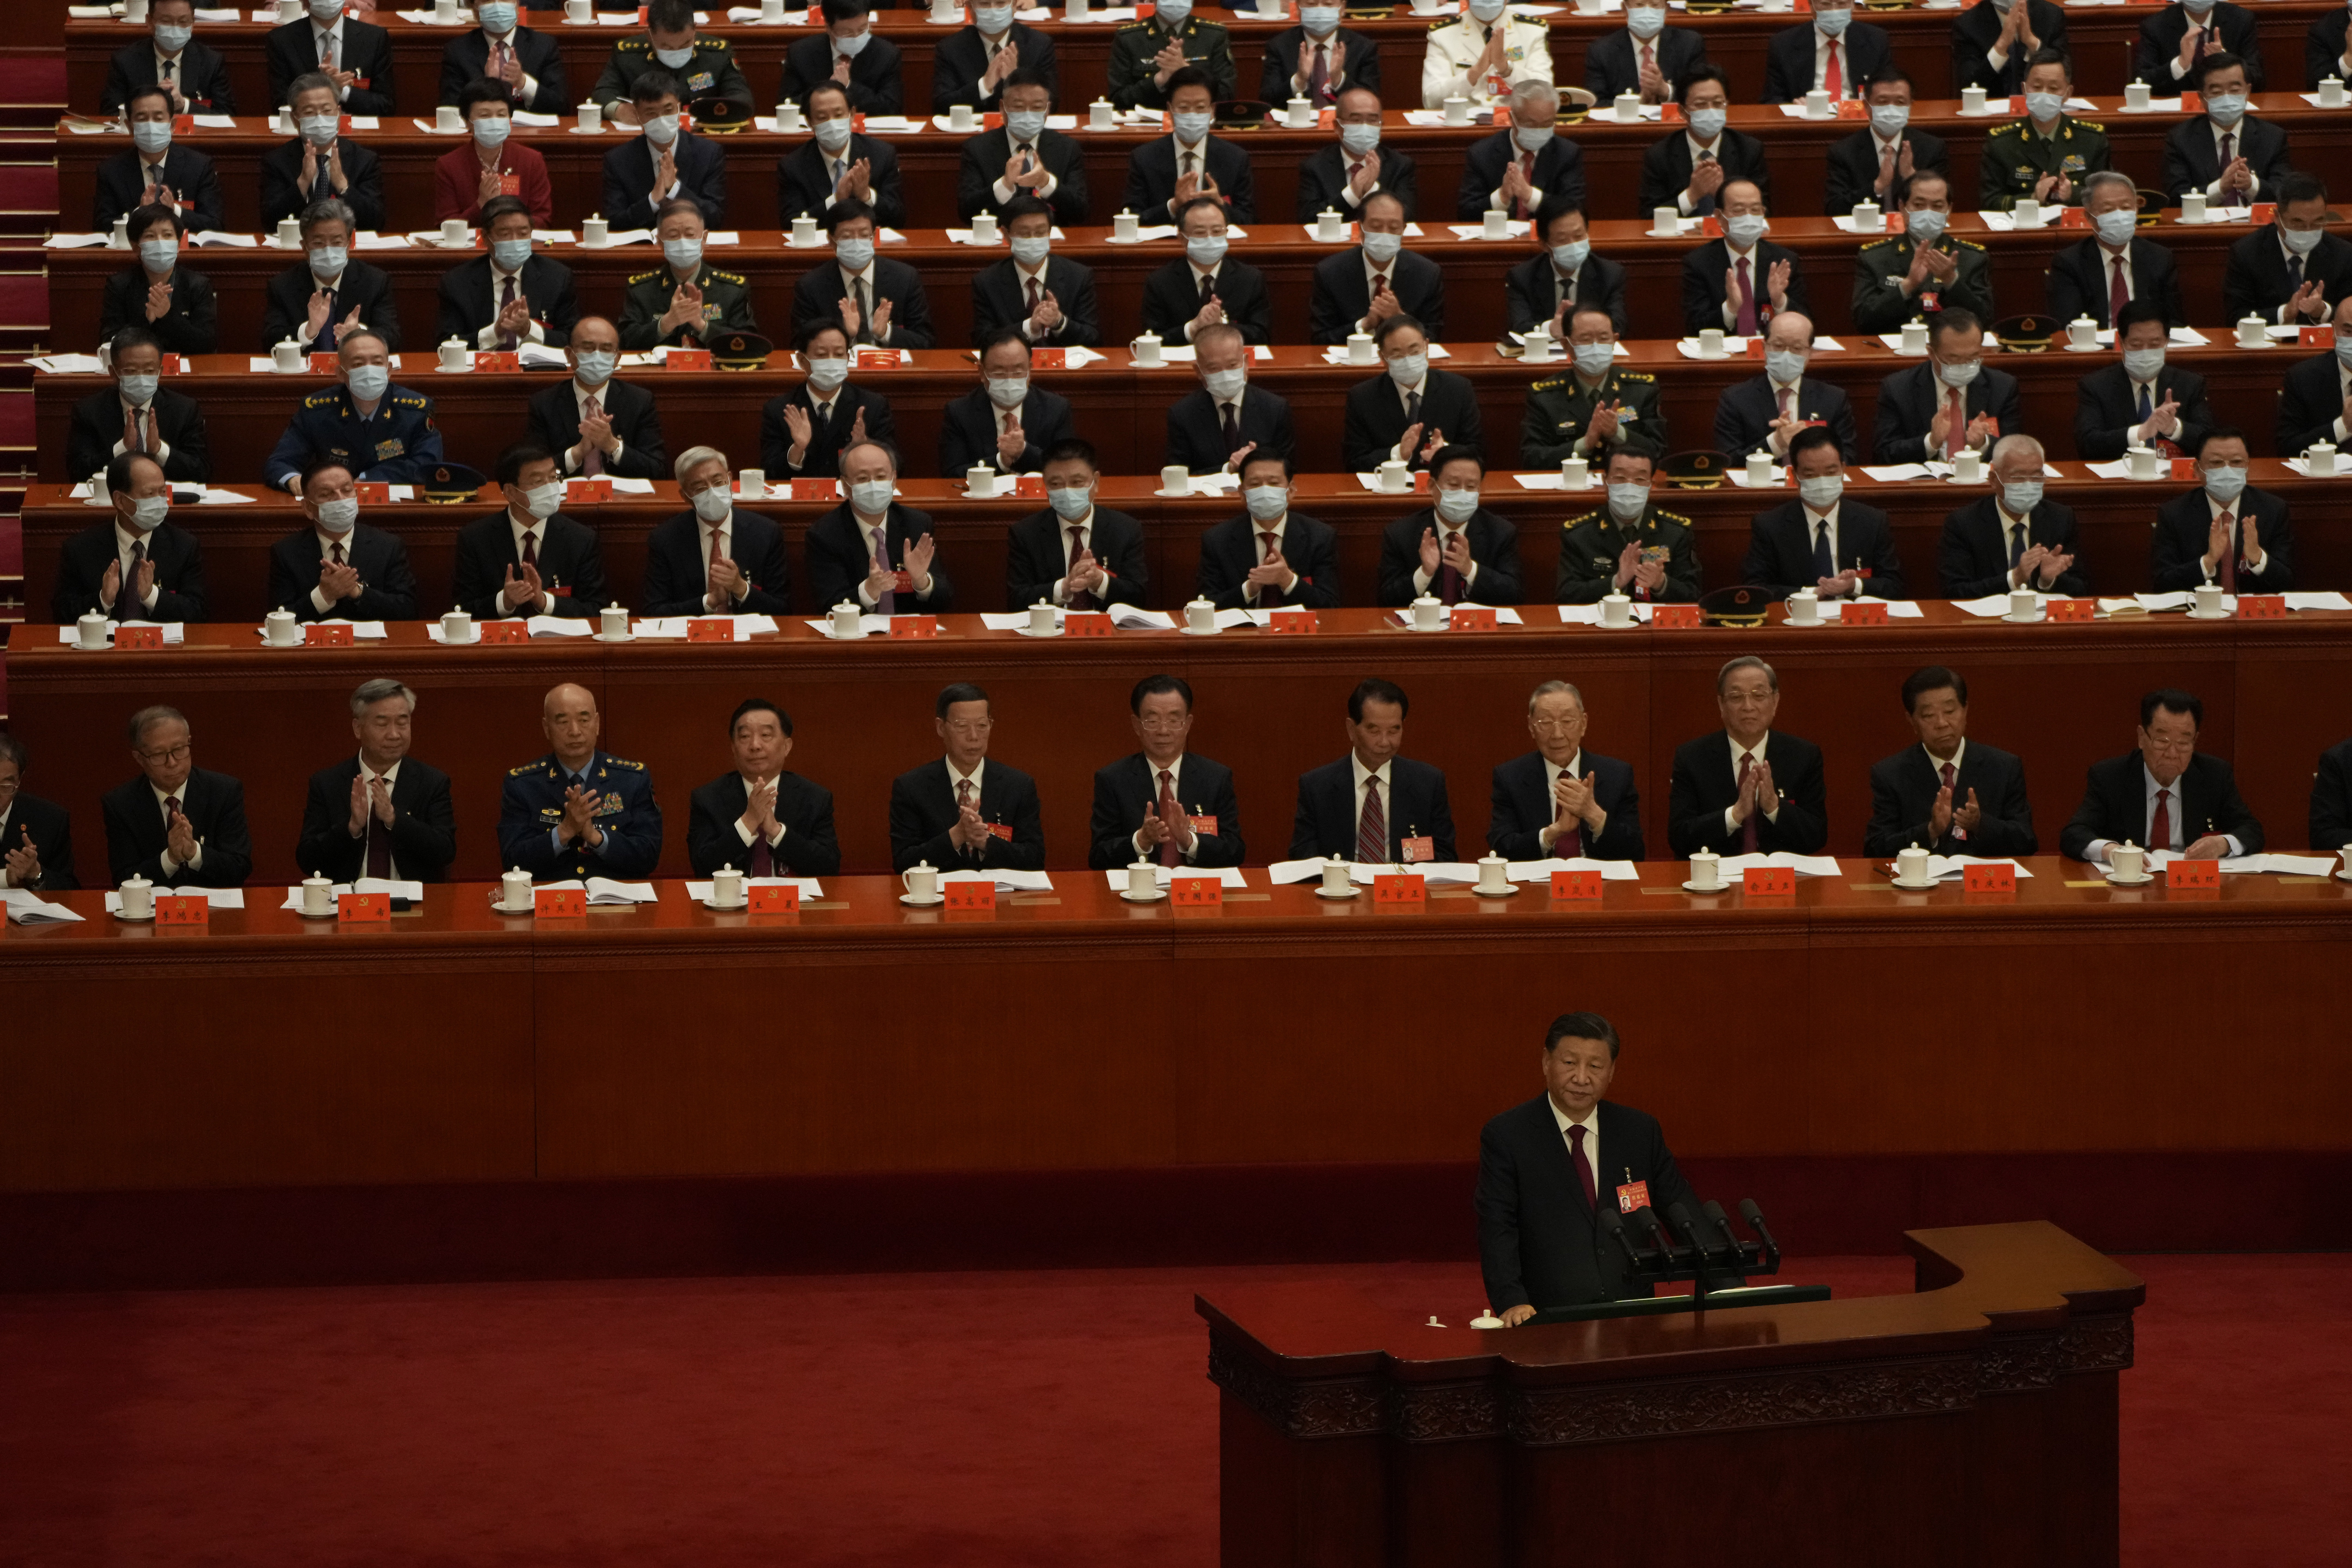 China's Xi Makes Big Speech on Country's Future Ahead of Probable 3rd Term